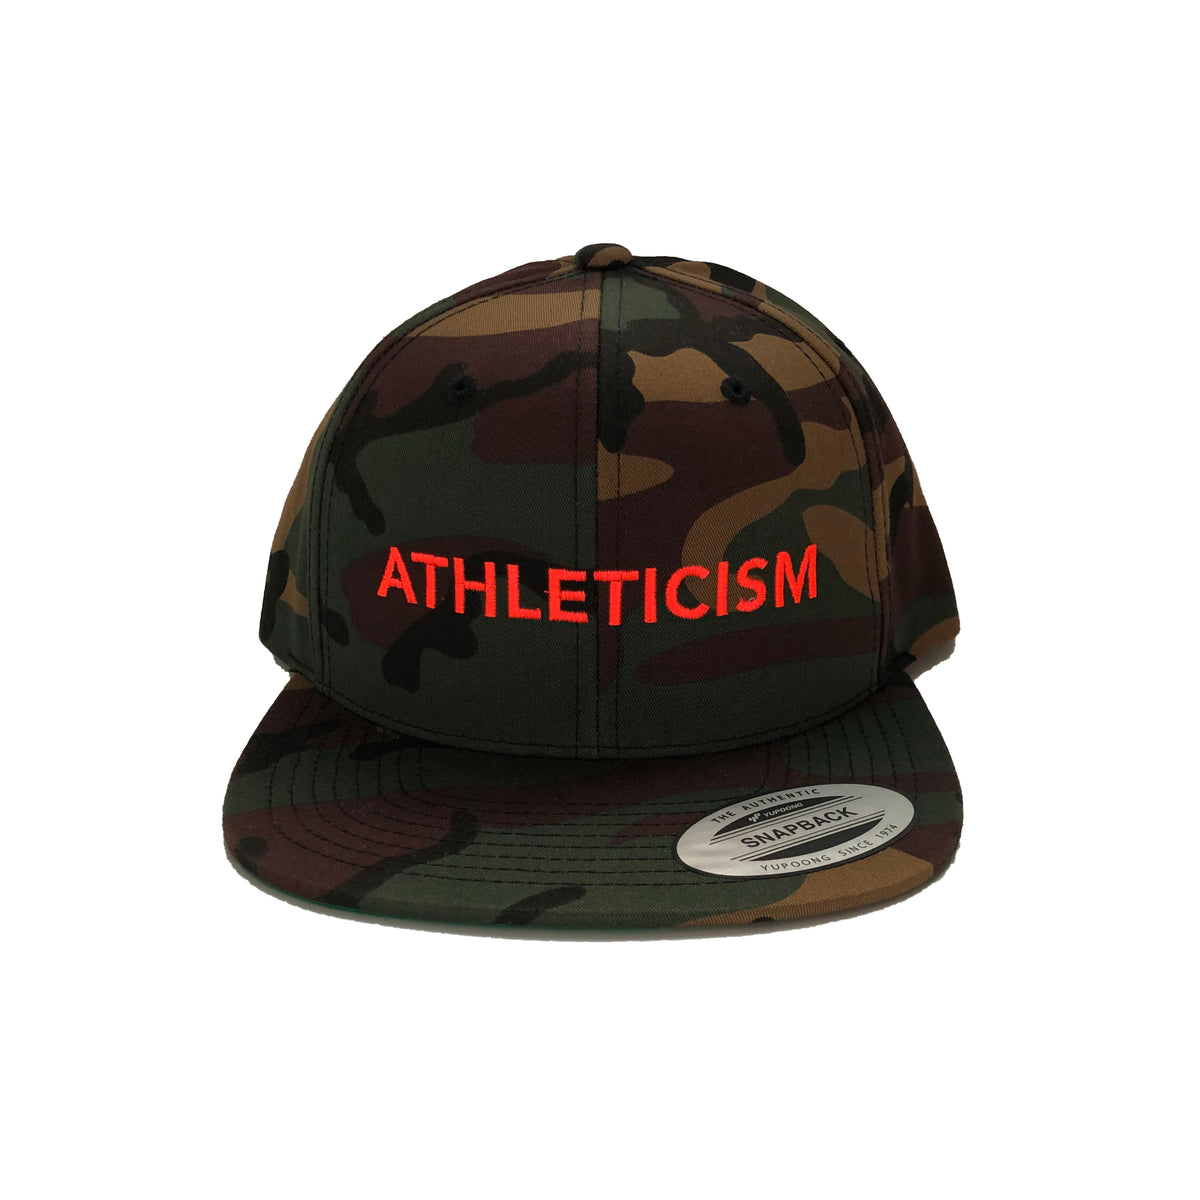 This is a vintage, soft mesh offers comfort, looks, and performance all in one. It is lightweight, breathable with a mid-structure profile. Basically, it is the most comfortable cap! The plastic snap closure is adjustable for most sizes. Logo up and show everyone that you are ATHLETICISM Made.